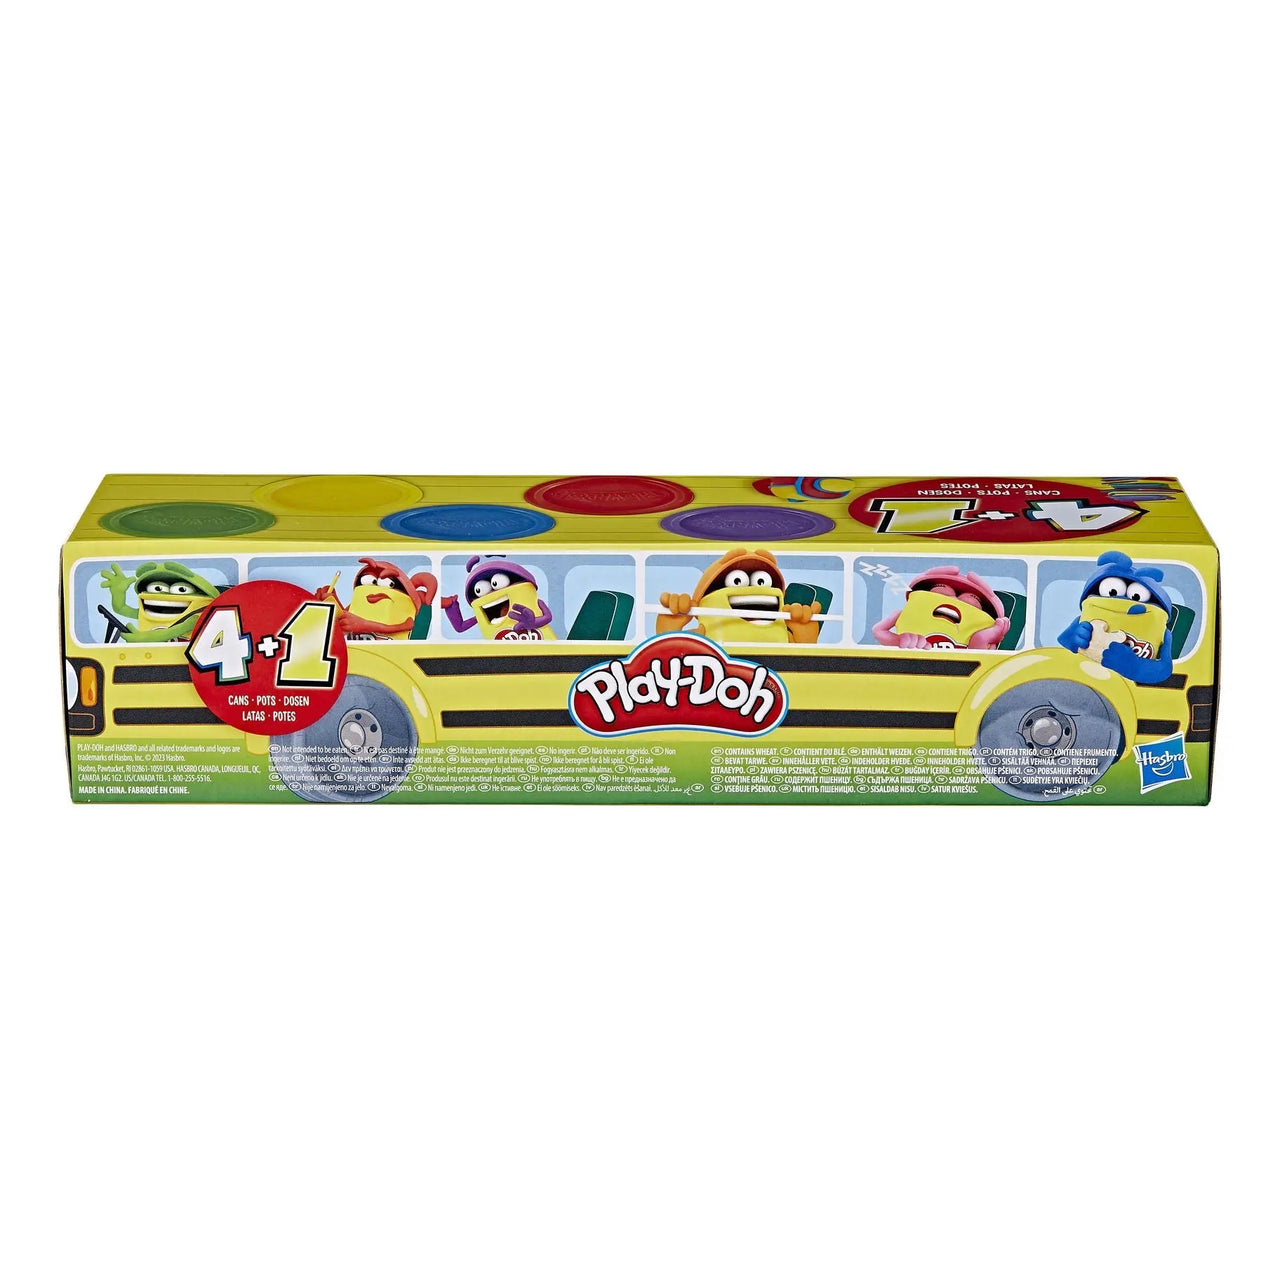 Play-Doh Back to School 5-Pack Play-Doh